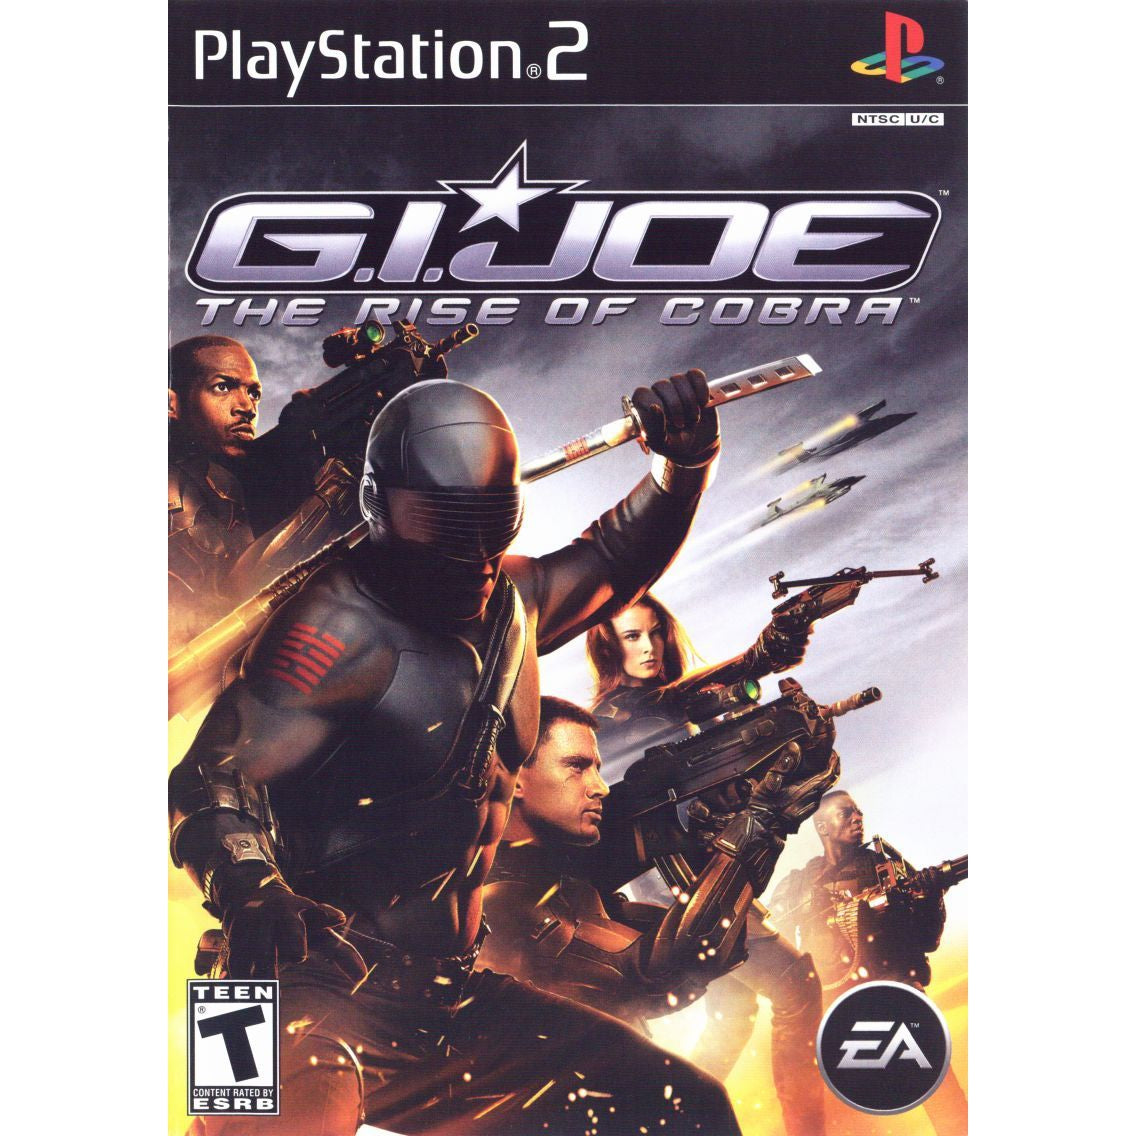 G.I. Joe: The Rise of Cobra - PlayStation 2 (PS2) Game Complete - YourGamingShop.com - Buy, Sell, Trade Video Games Online. 120 Day Warranty. Satisfaction Guaranteed.